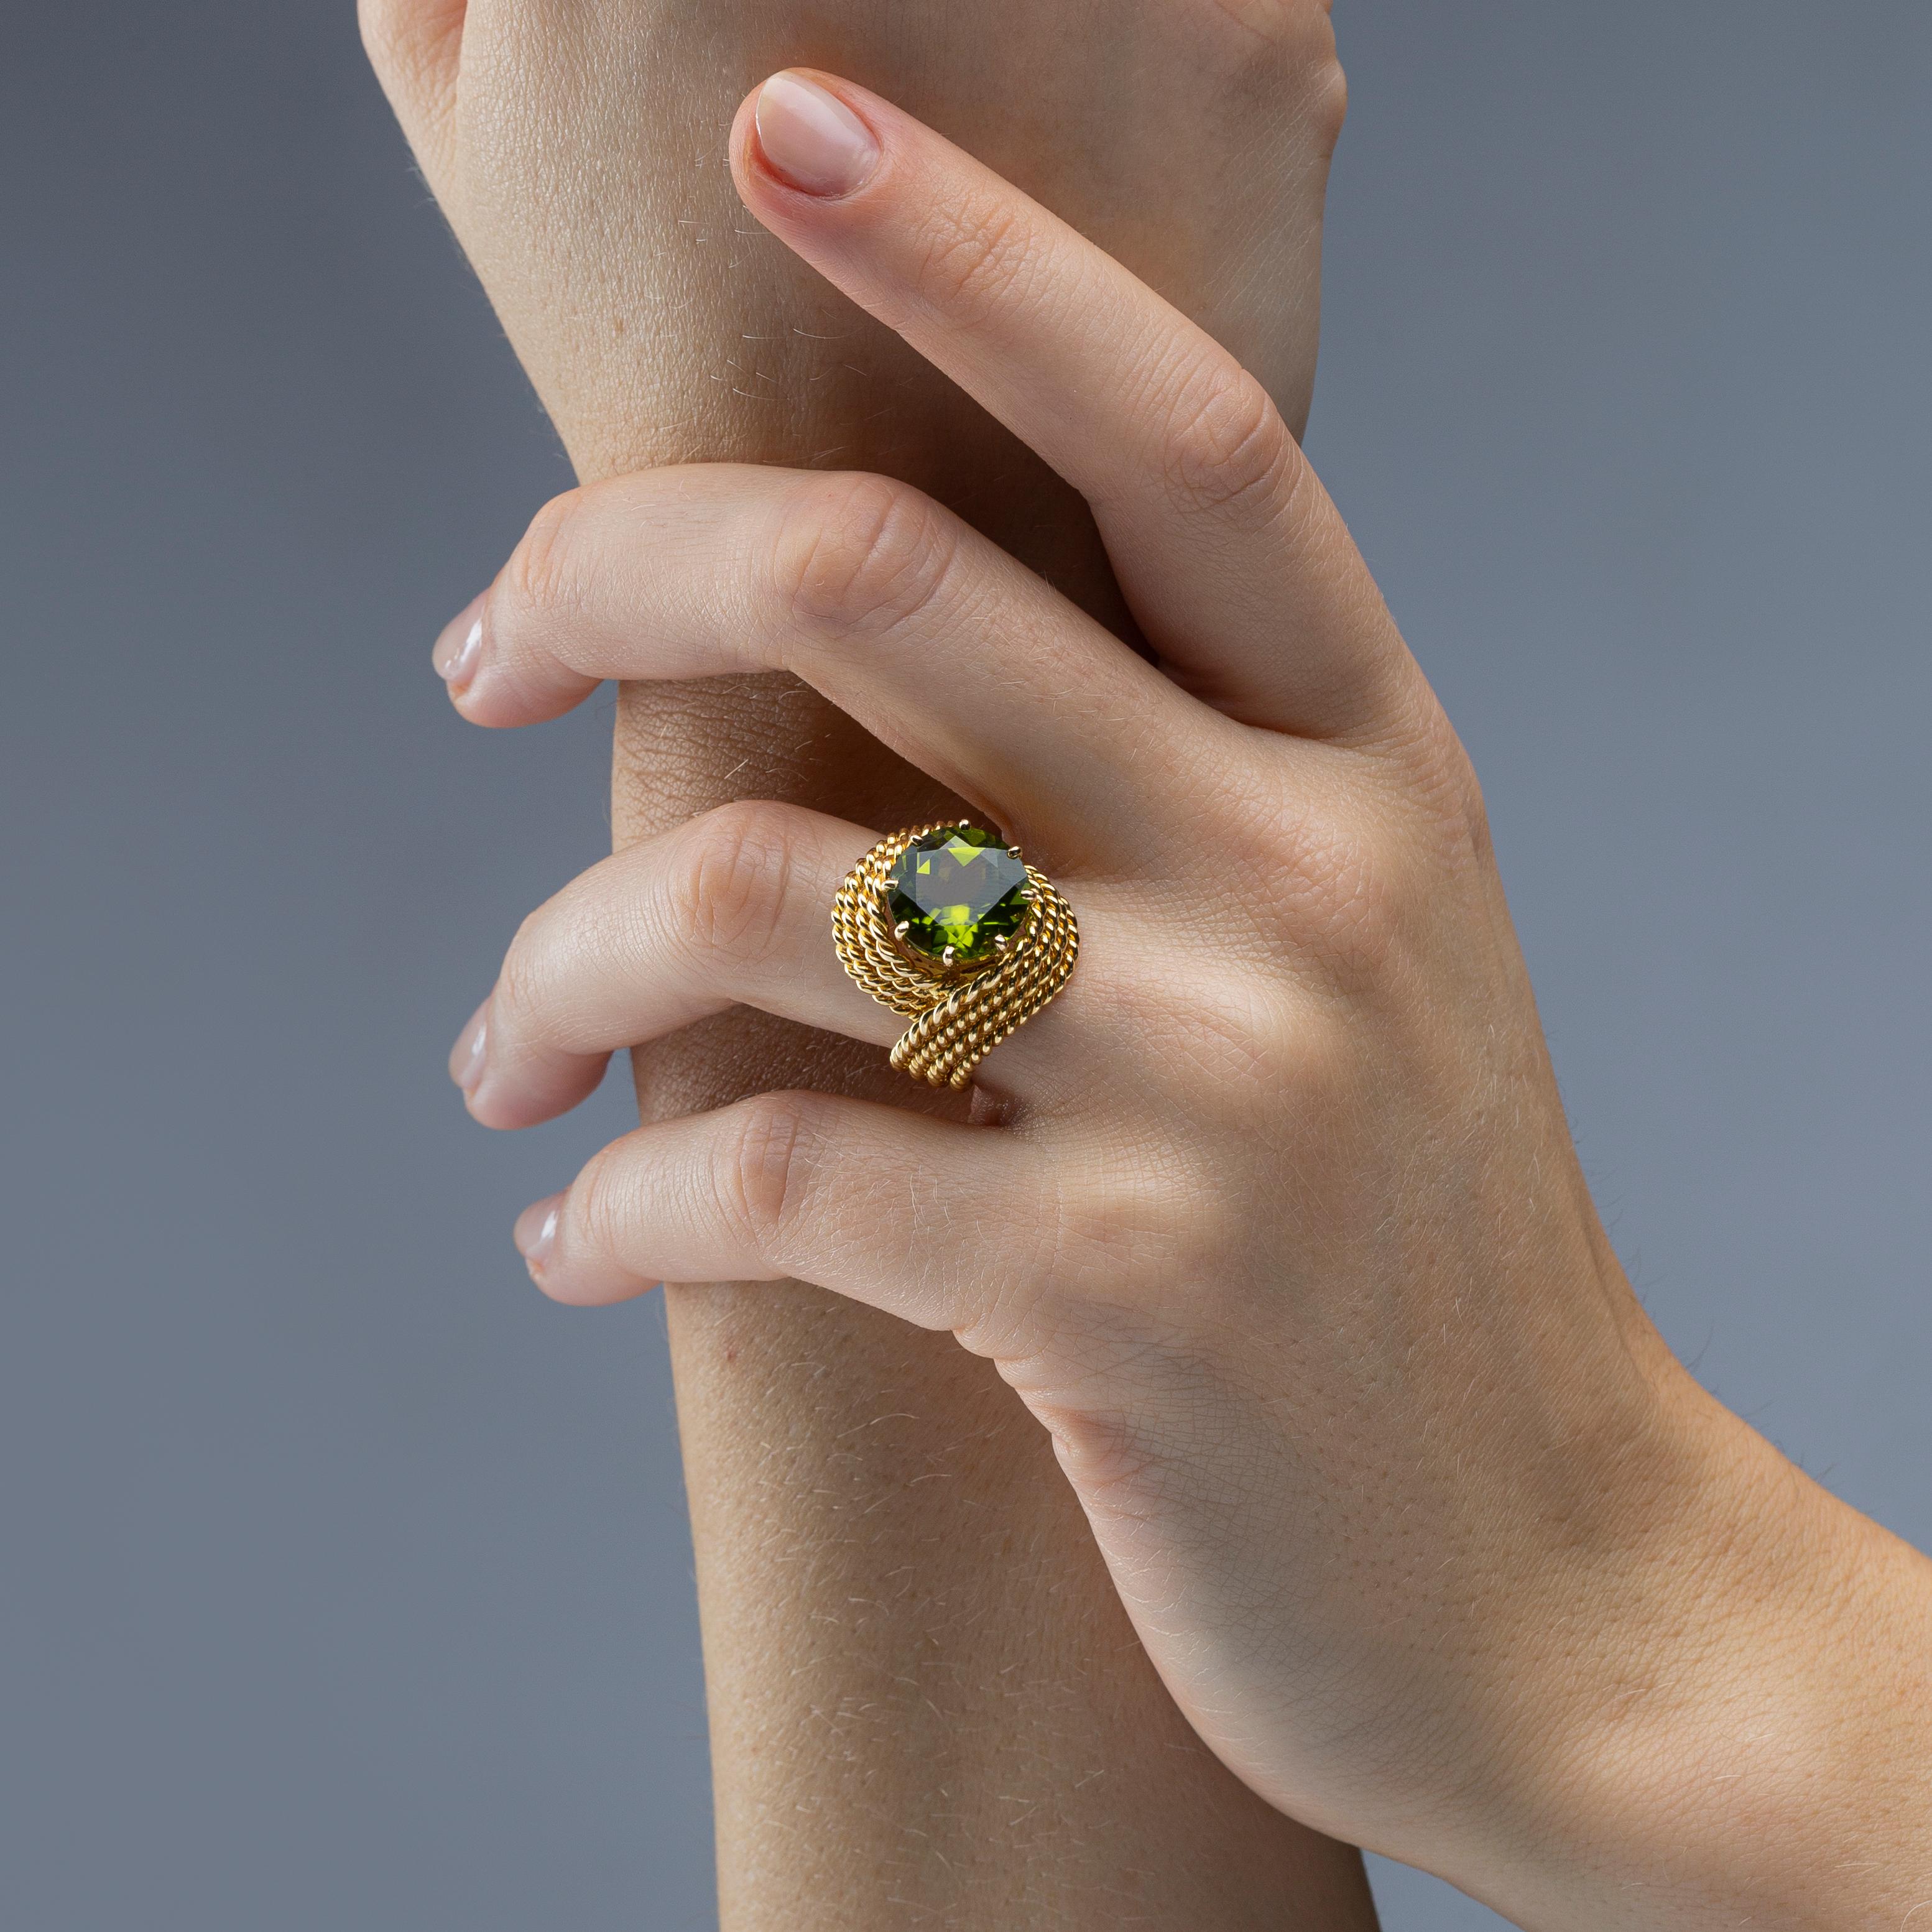 Alex Jona Nounou ring, hand crafted in Italy, 18k yellow gold ring, centering a round cut peridot weighing  6.5 carats; size 5.5, can be sized to any specification.

Alex Jona jewels stand out, not only for their special design and for the excellent